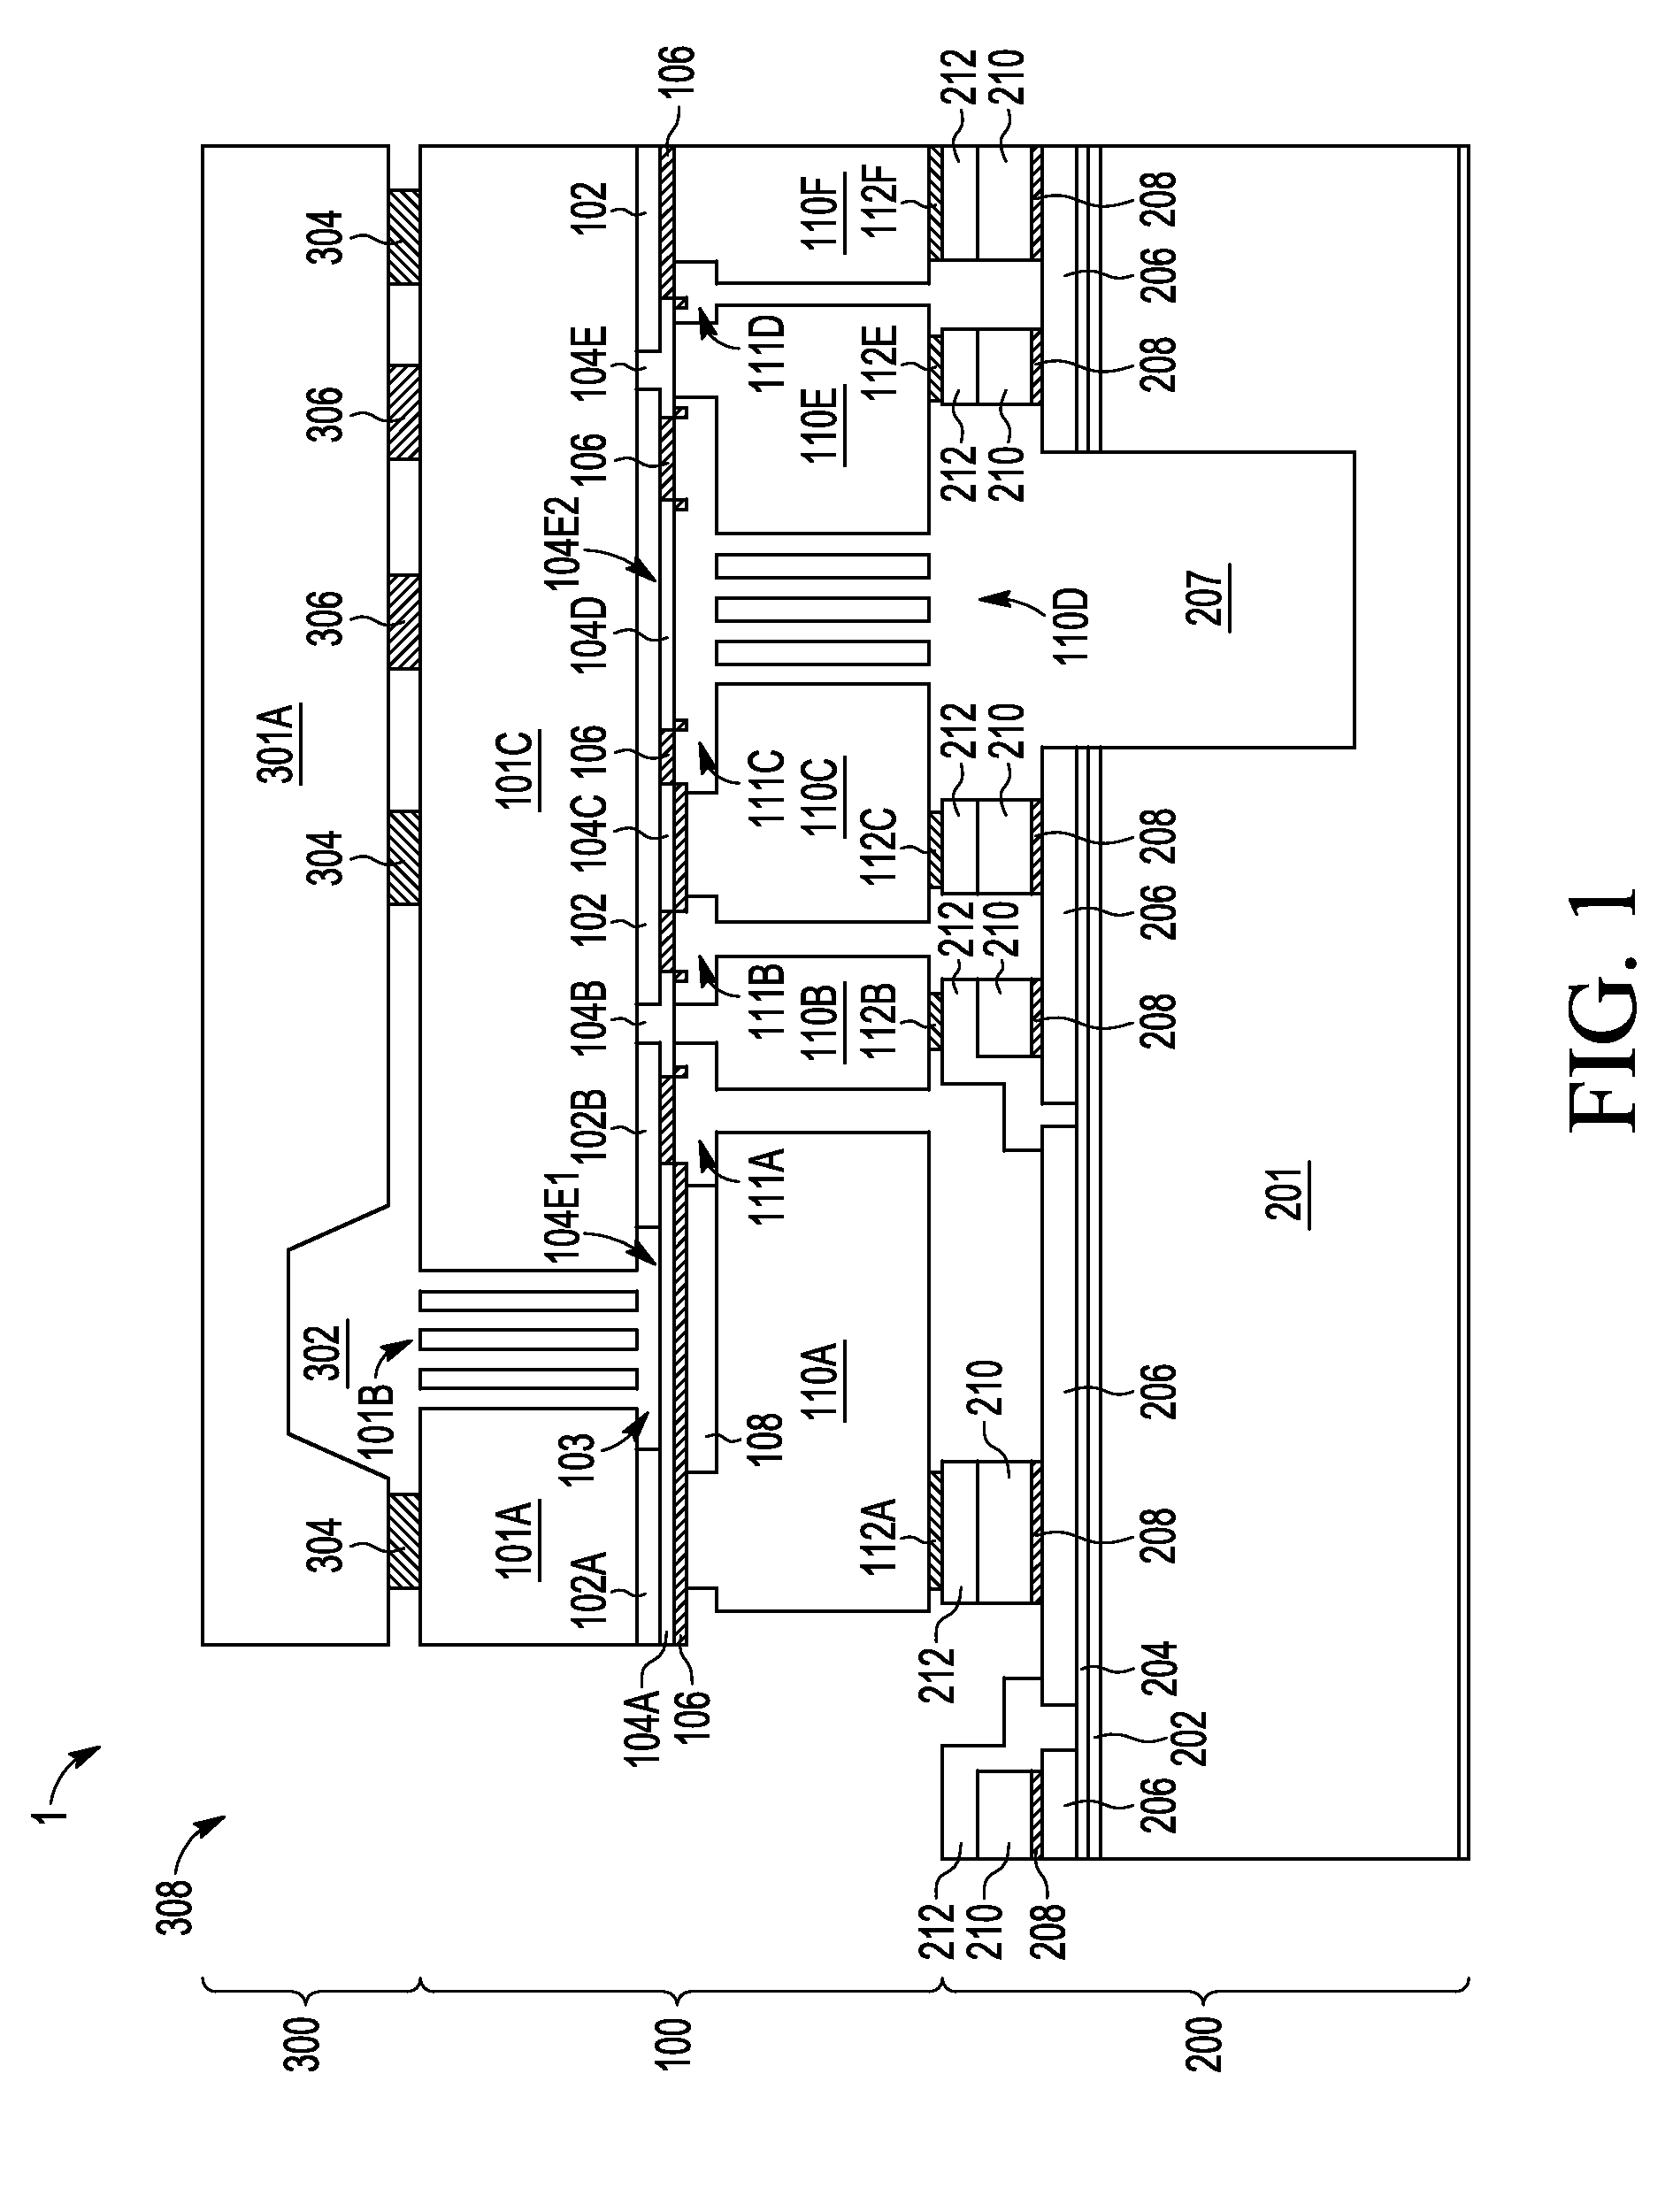 MEMS Fabrication Process with Two Cavities Operating at Different Pressures